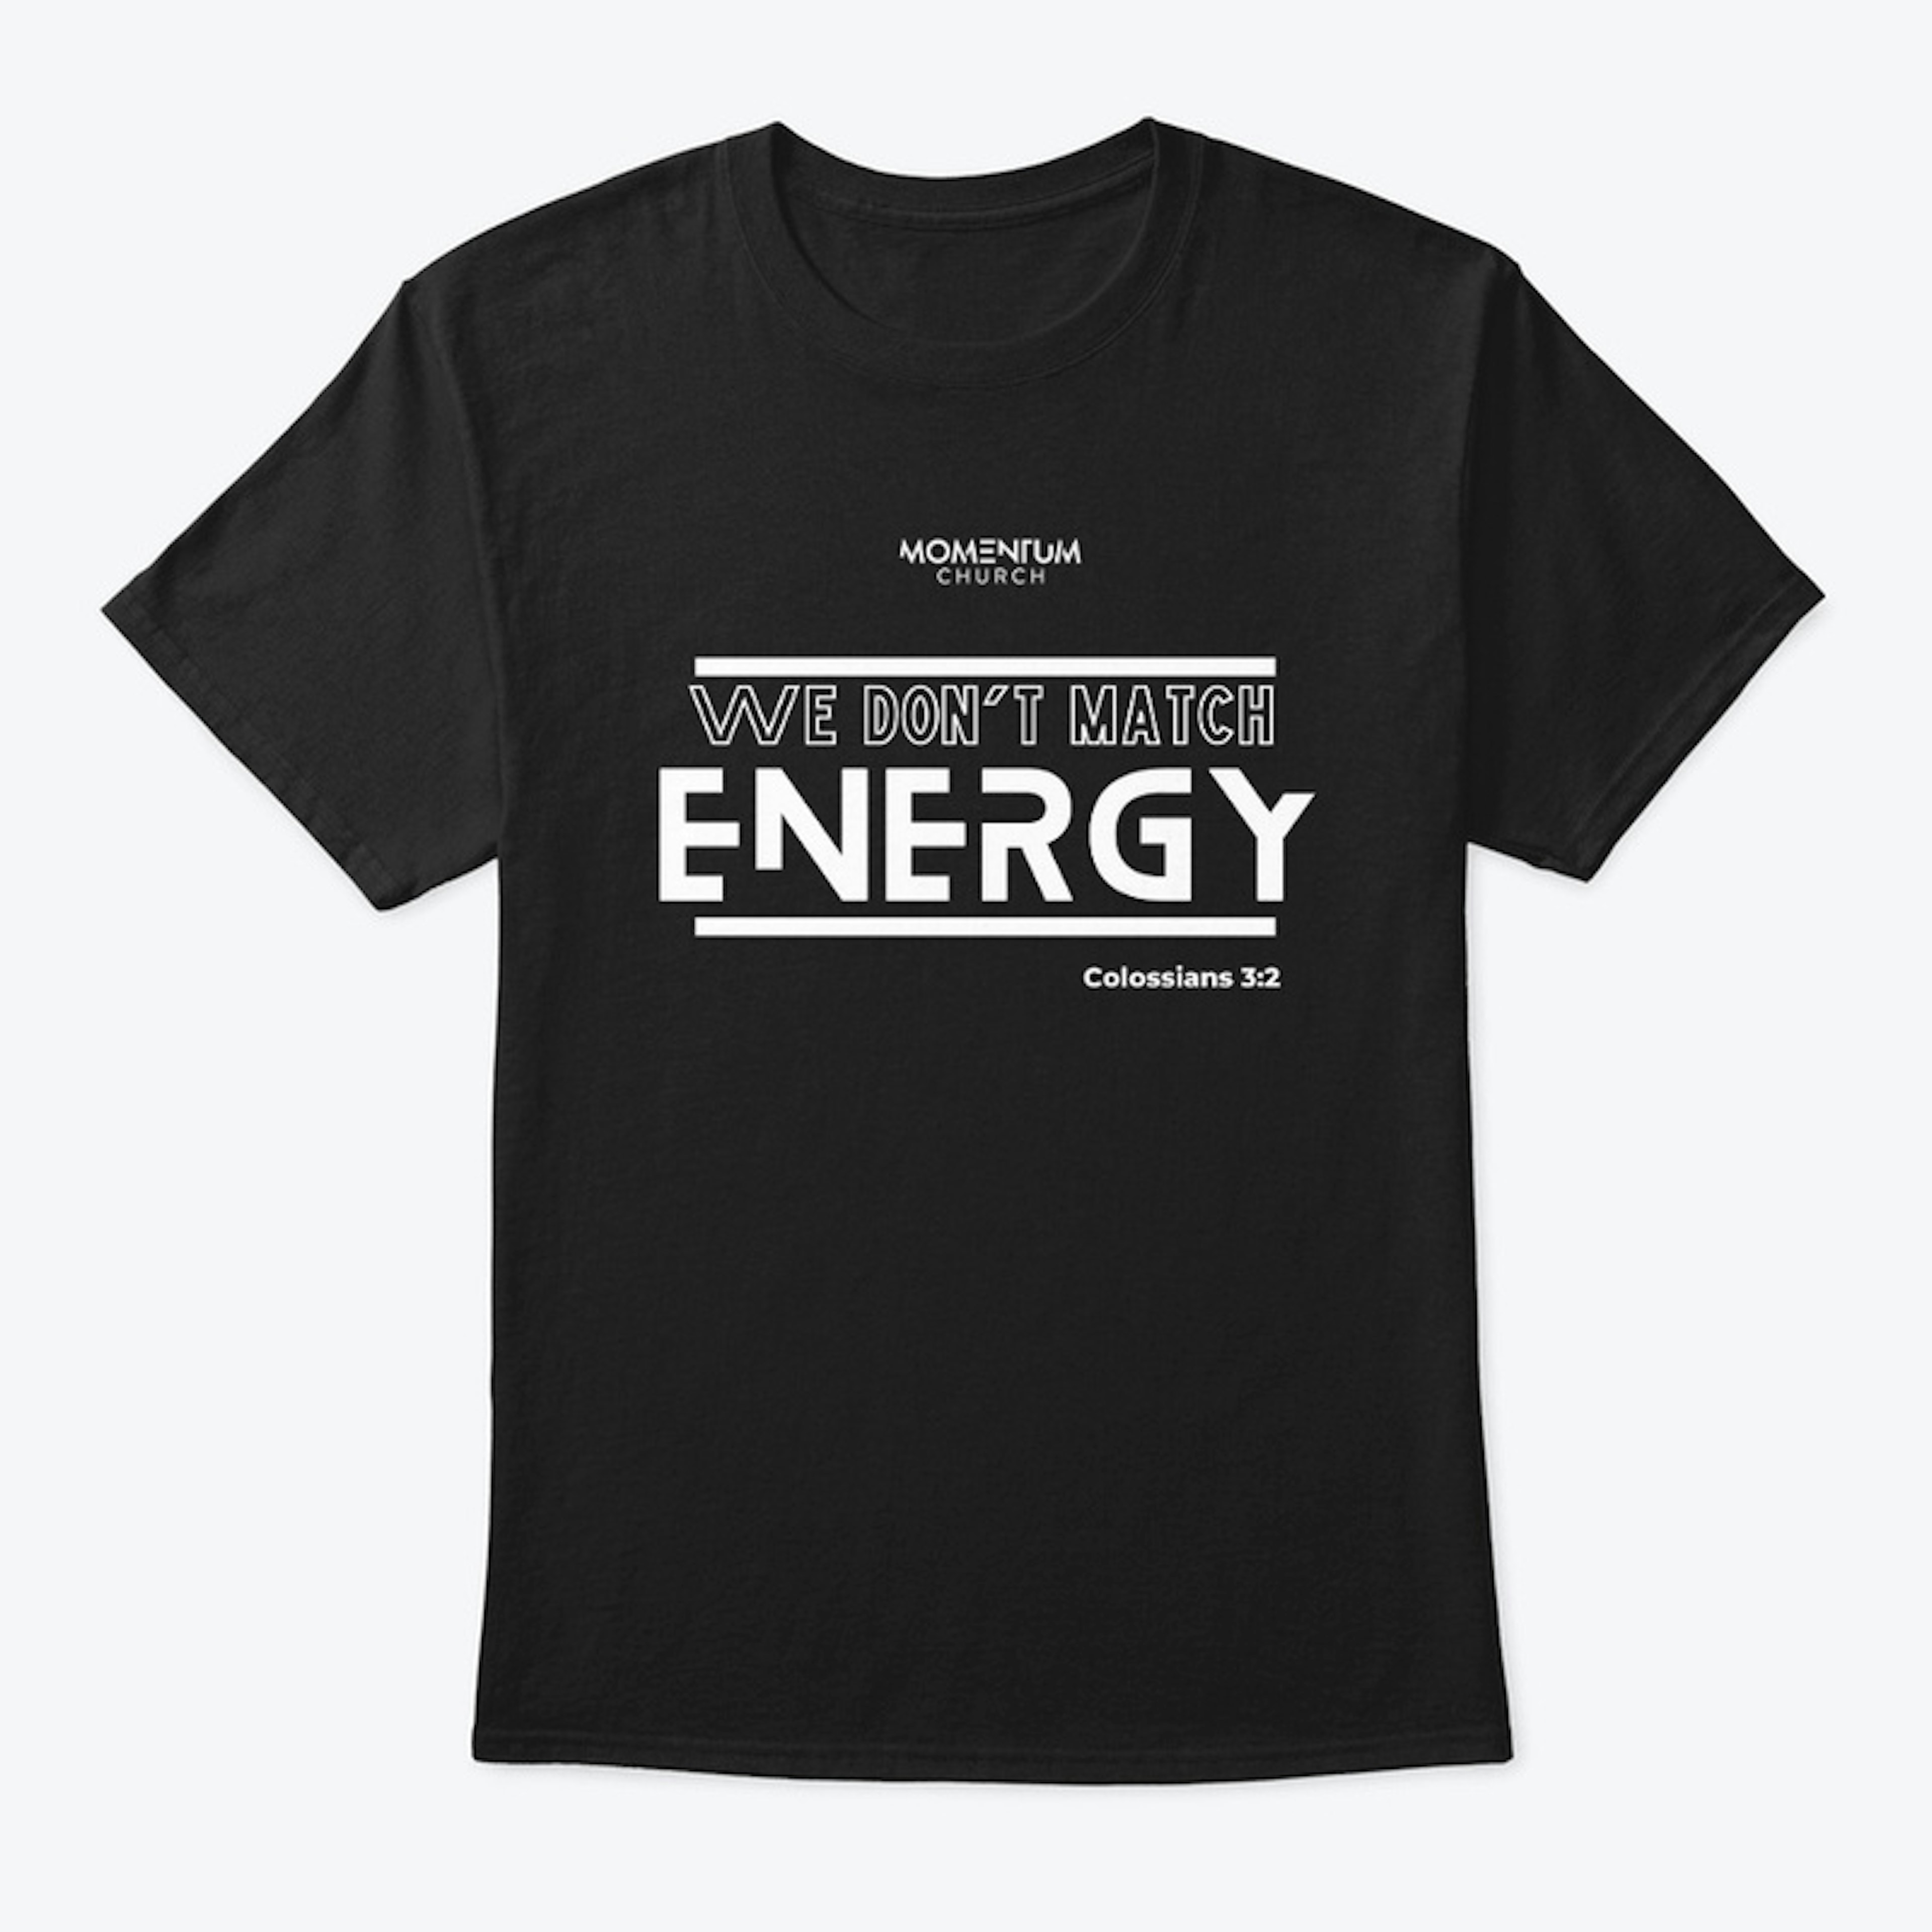 We Don't Match Energy Tee